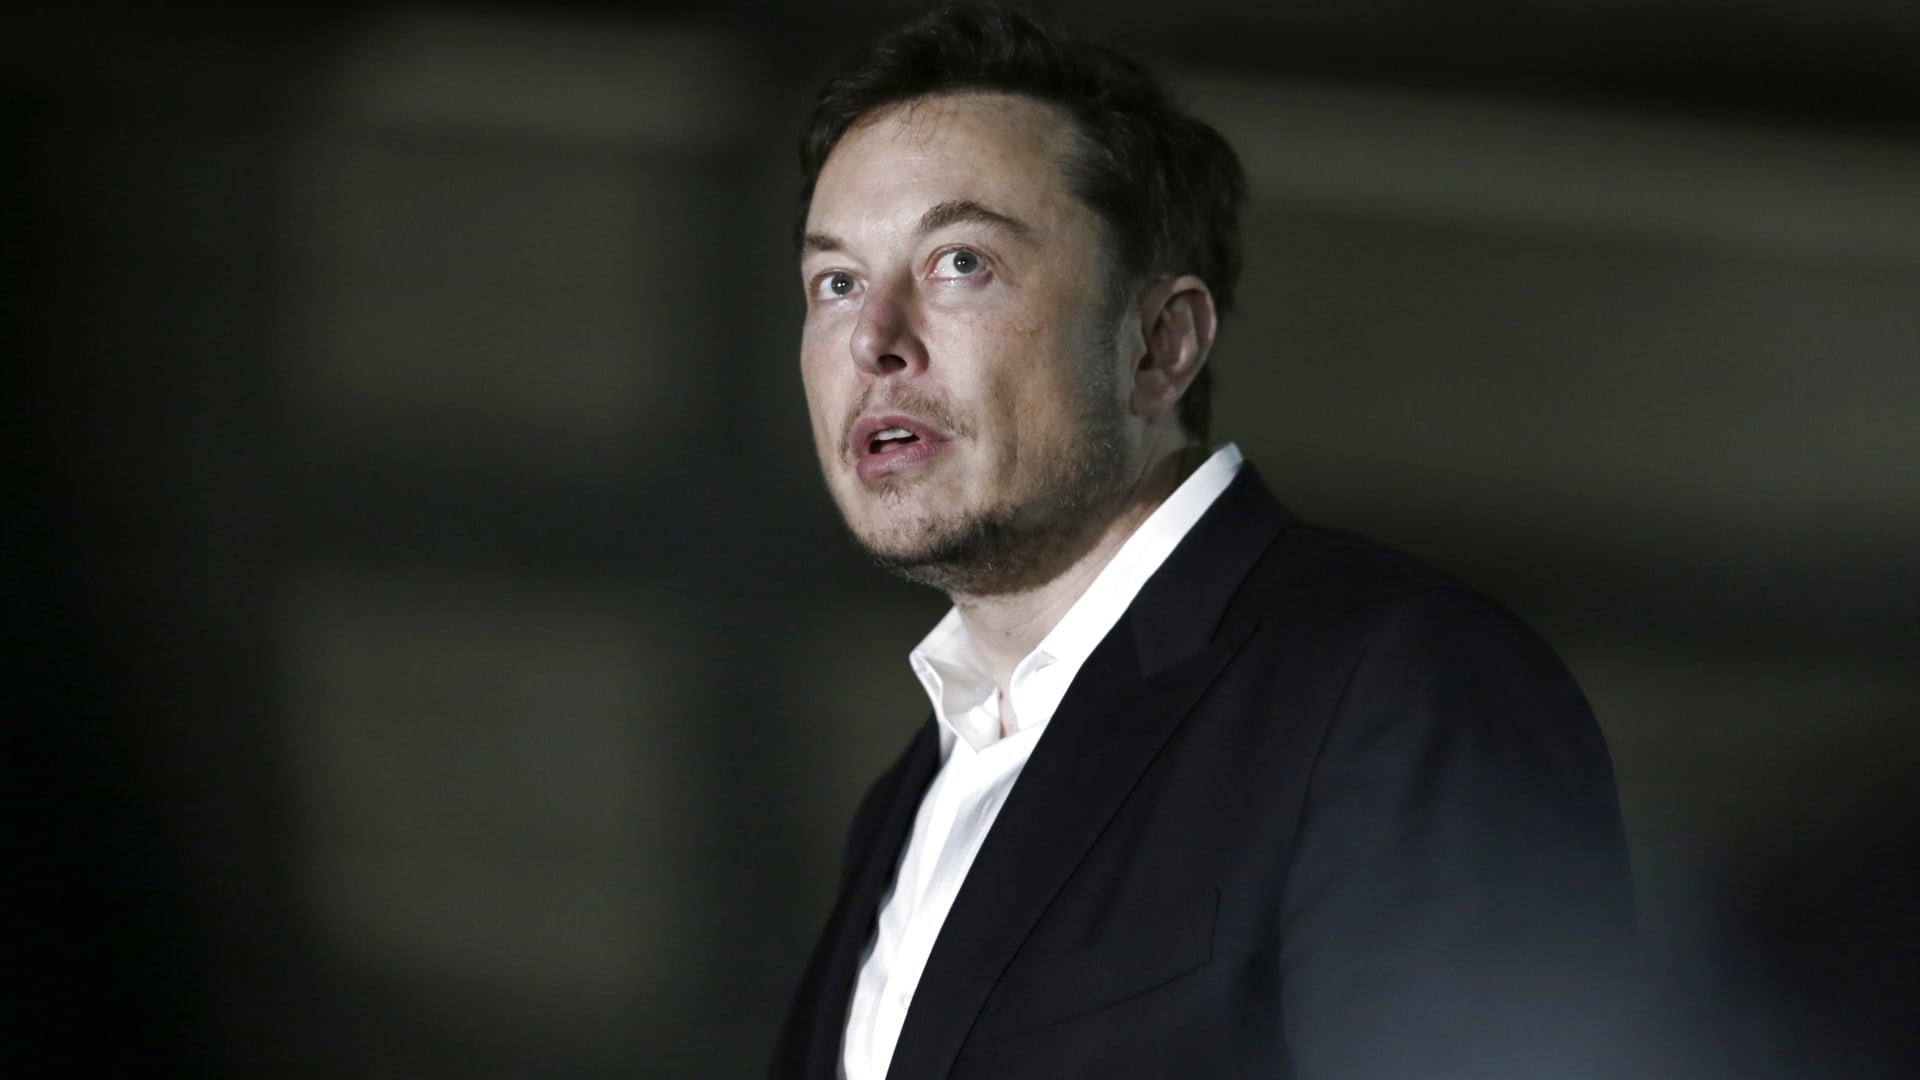 SEC charges Tesla CEO Elon Musk with fraud